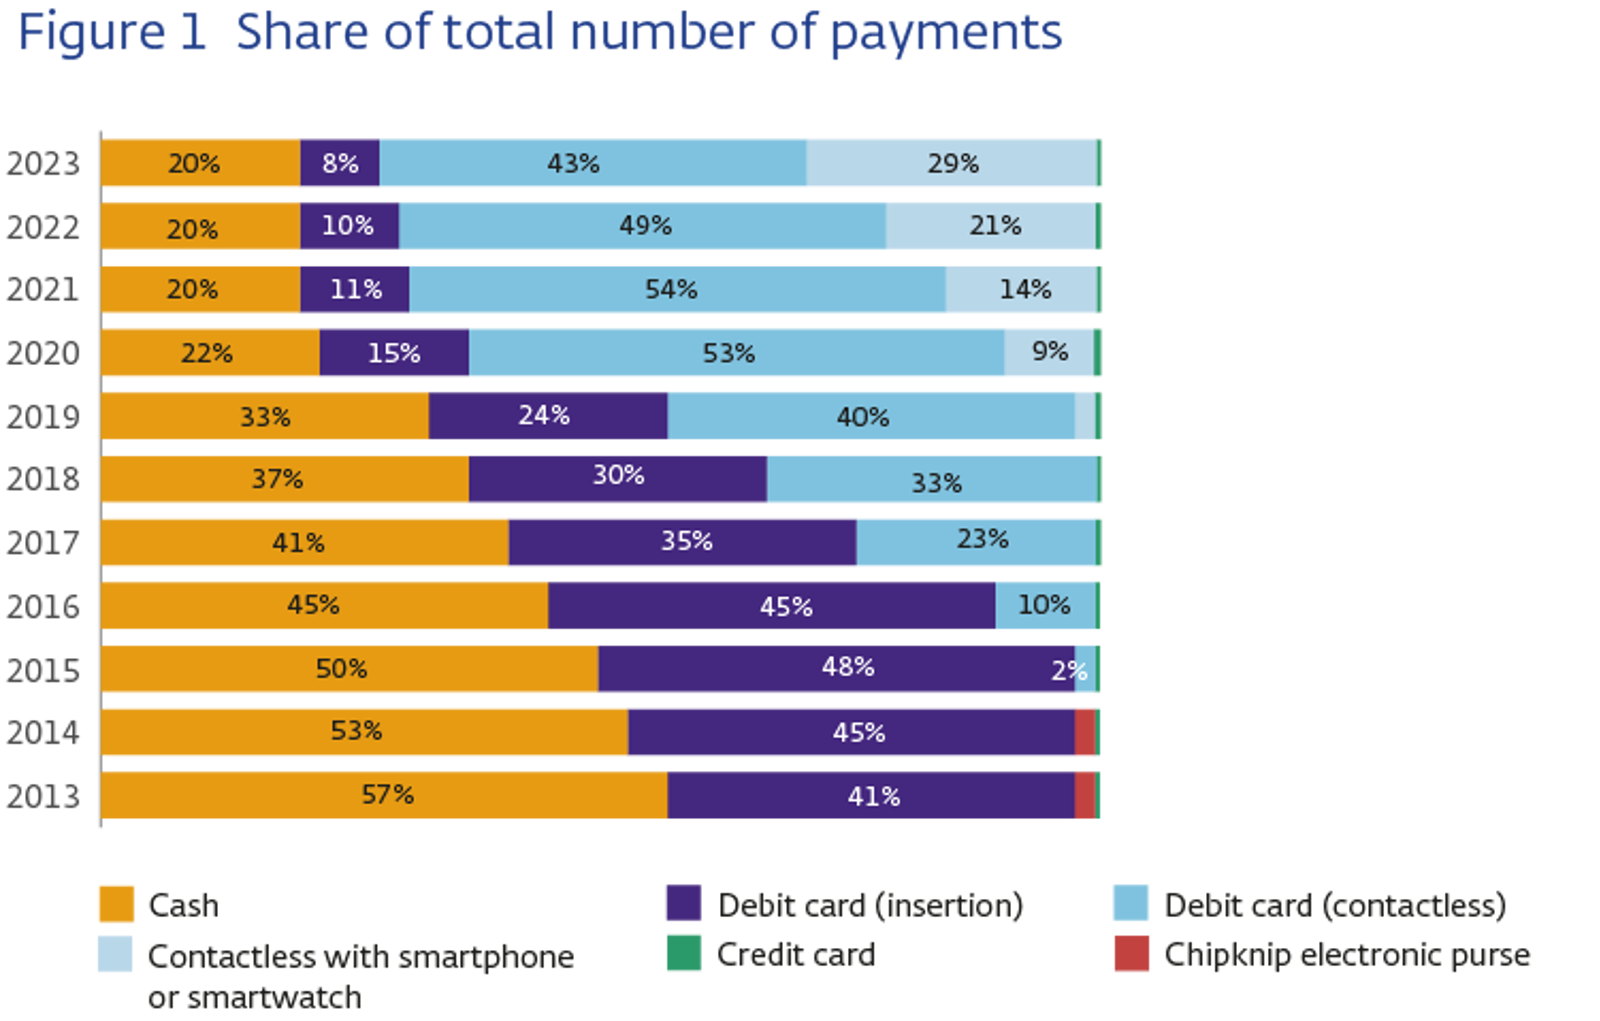 Share of total number of payments.